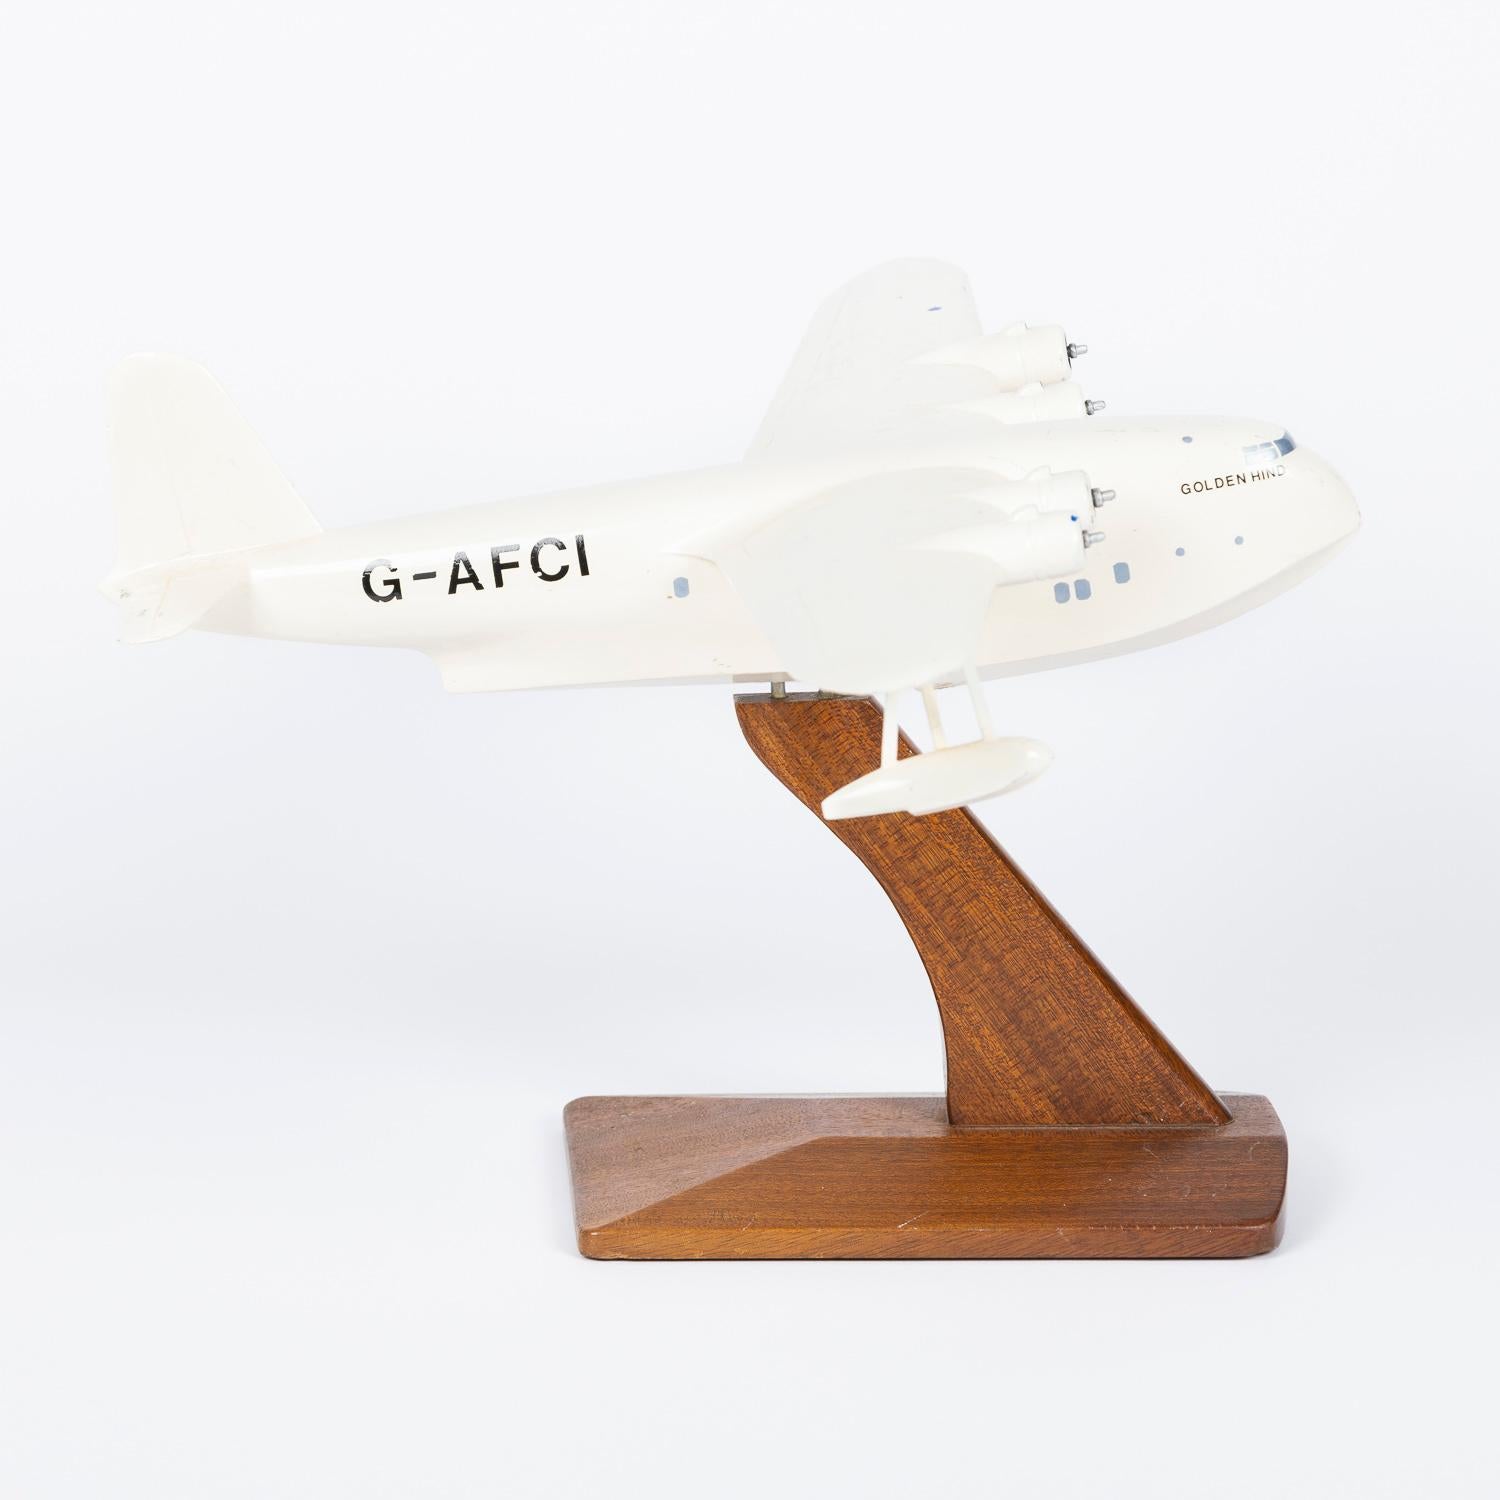 Scale model of the Short Brothers S.26 G-Class flying boat G-AFCI the Golden Hind. 

The Short S.26 G-class was a large transport flying boat designed and produced by the British aircraft manufacturer Short Brothers. It was designed to achieve a